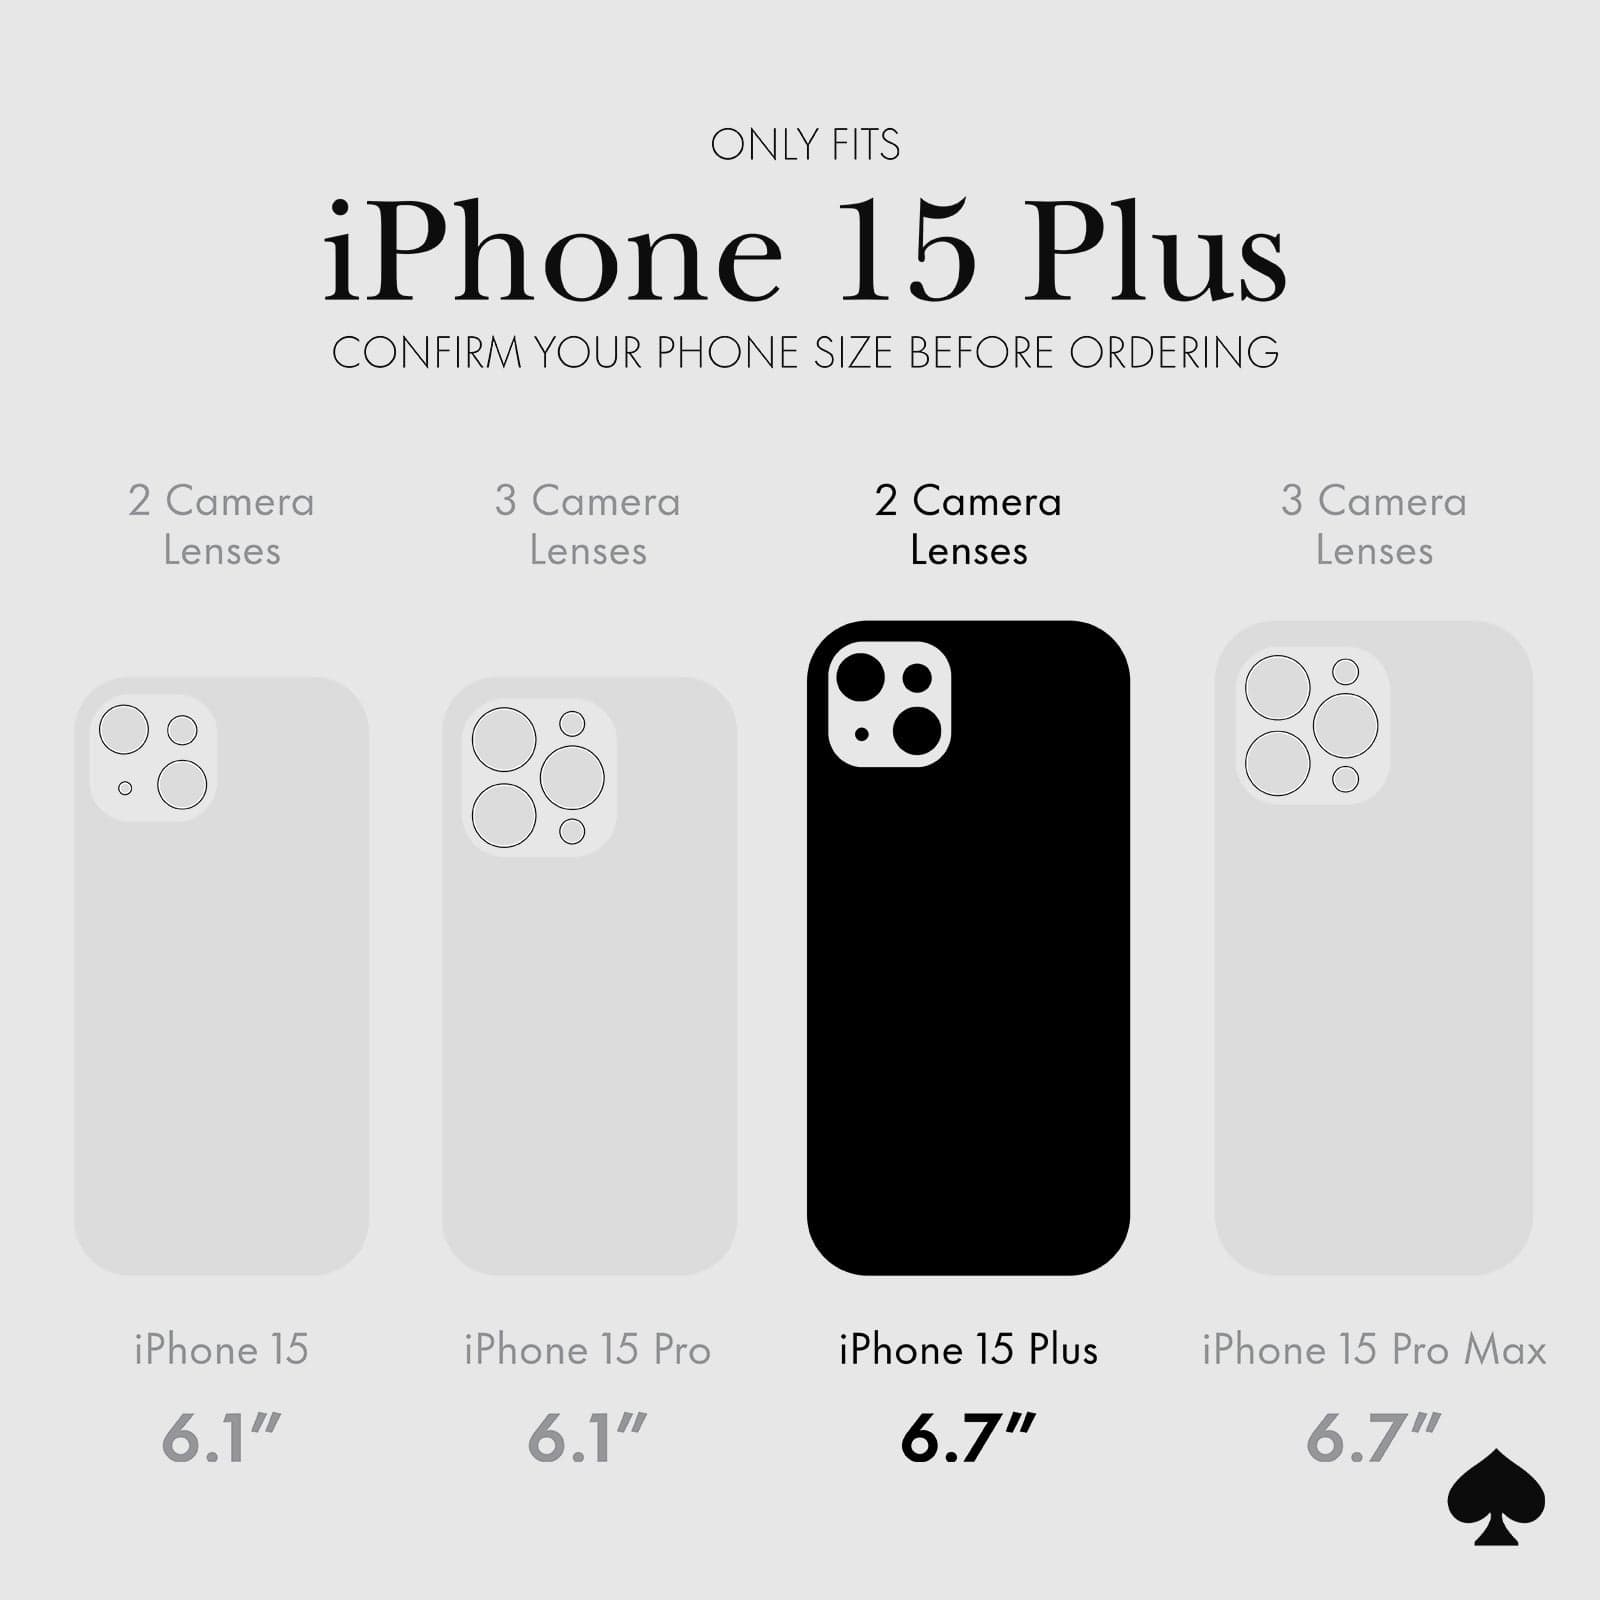 ONLY FITS IPHONE 15 PLUS CONFIRM YOUR PHONE SIZE BEFORE ORDERING